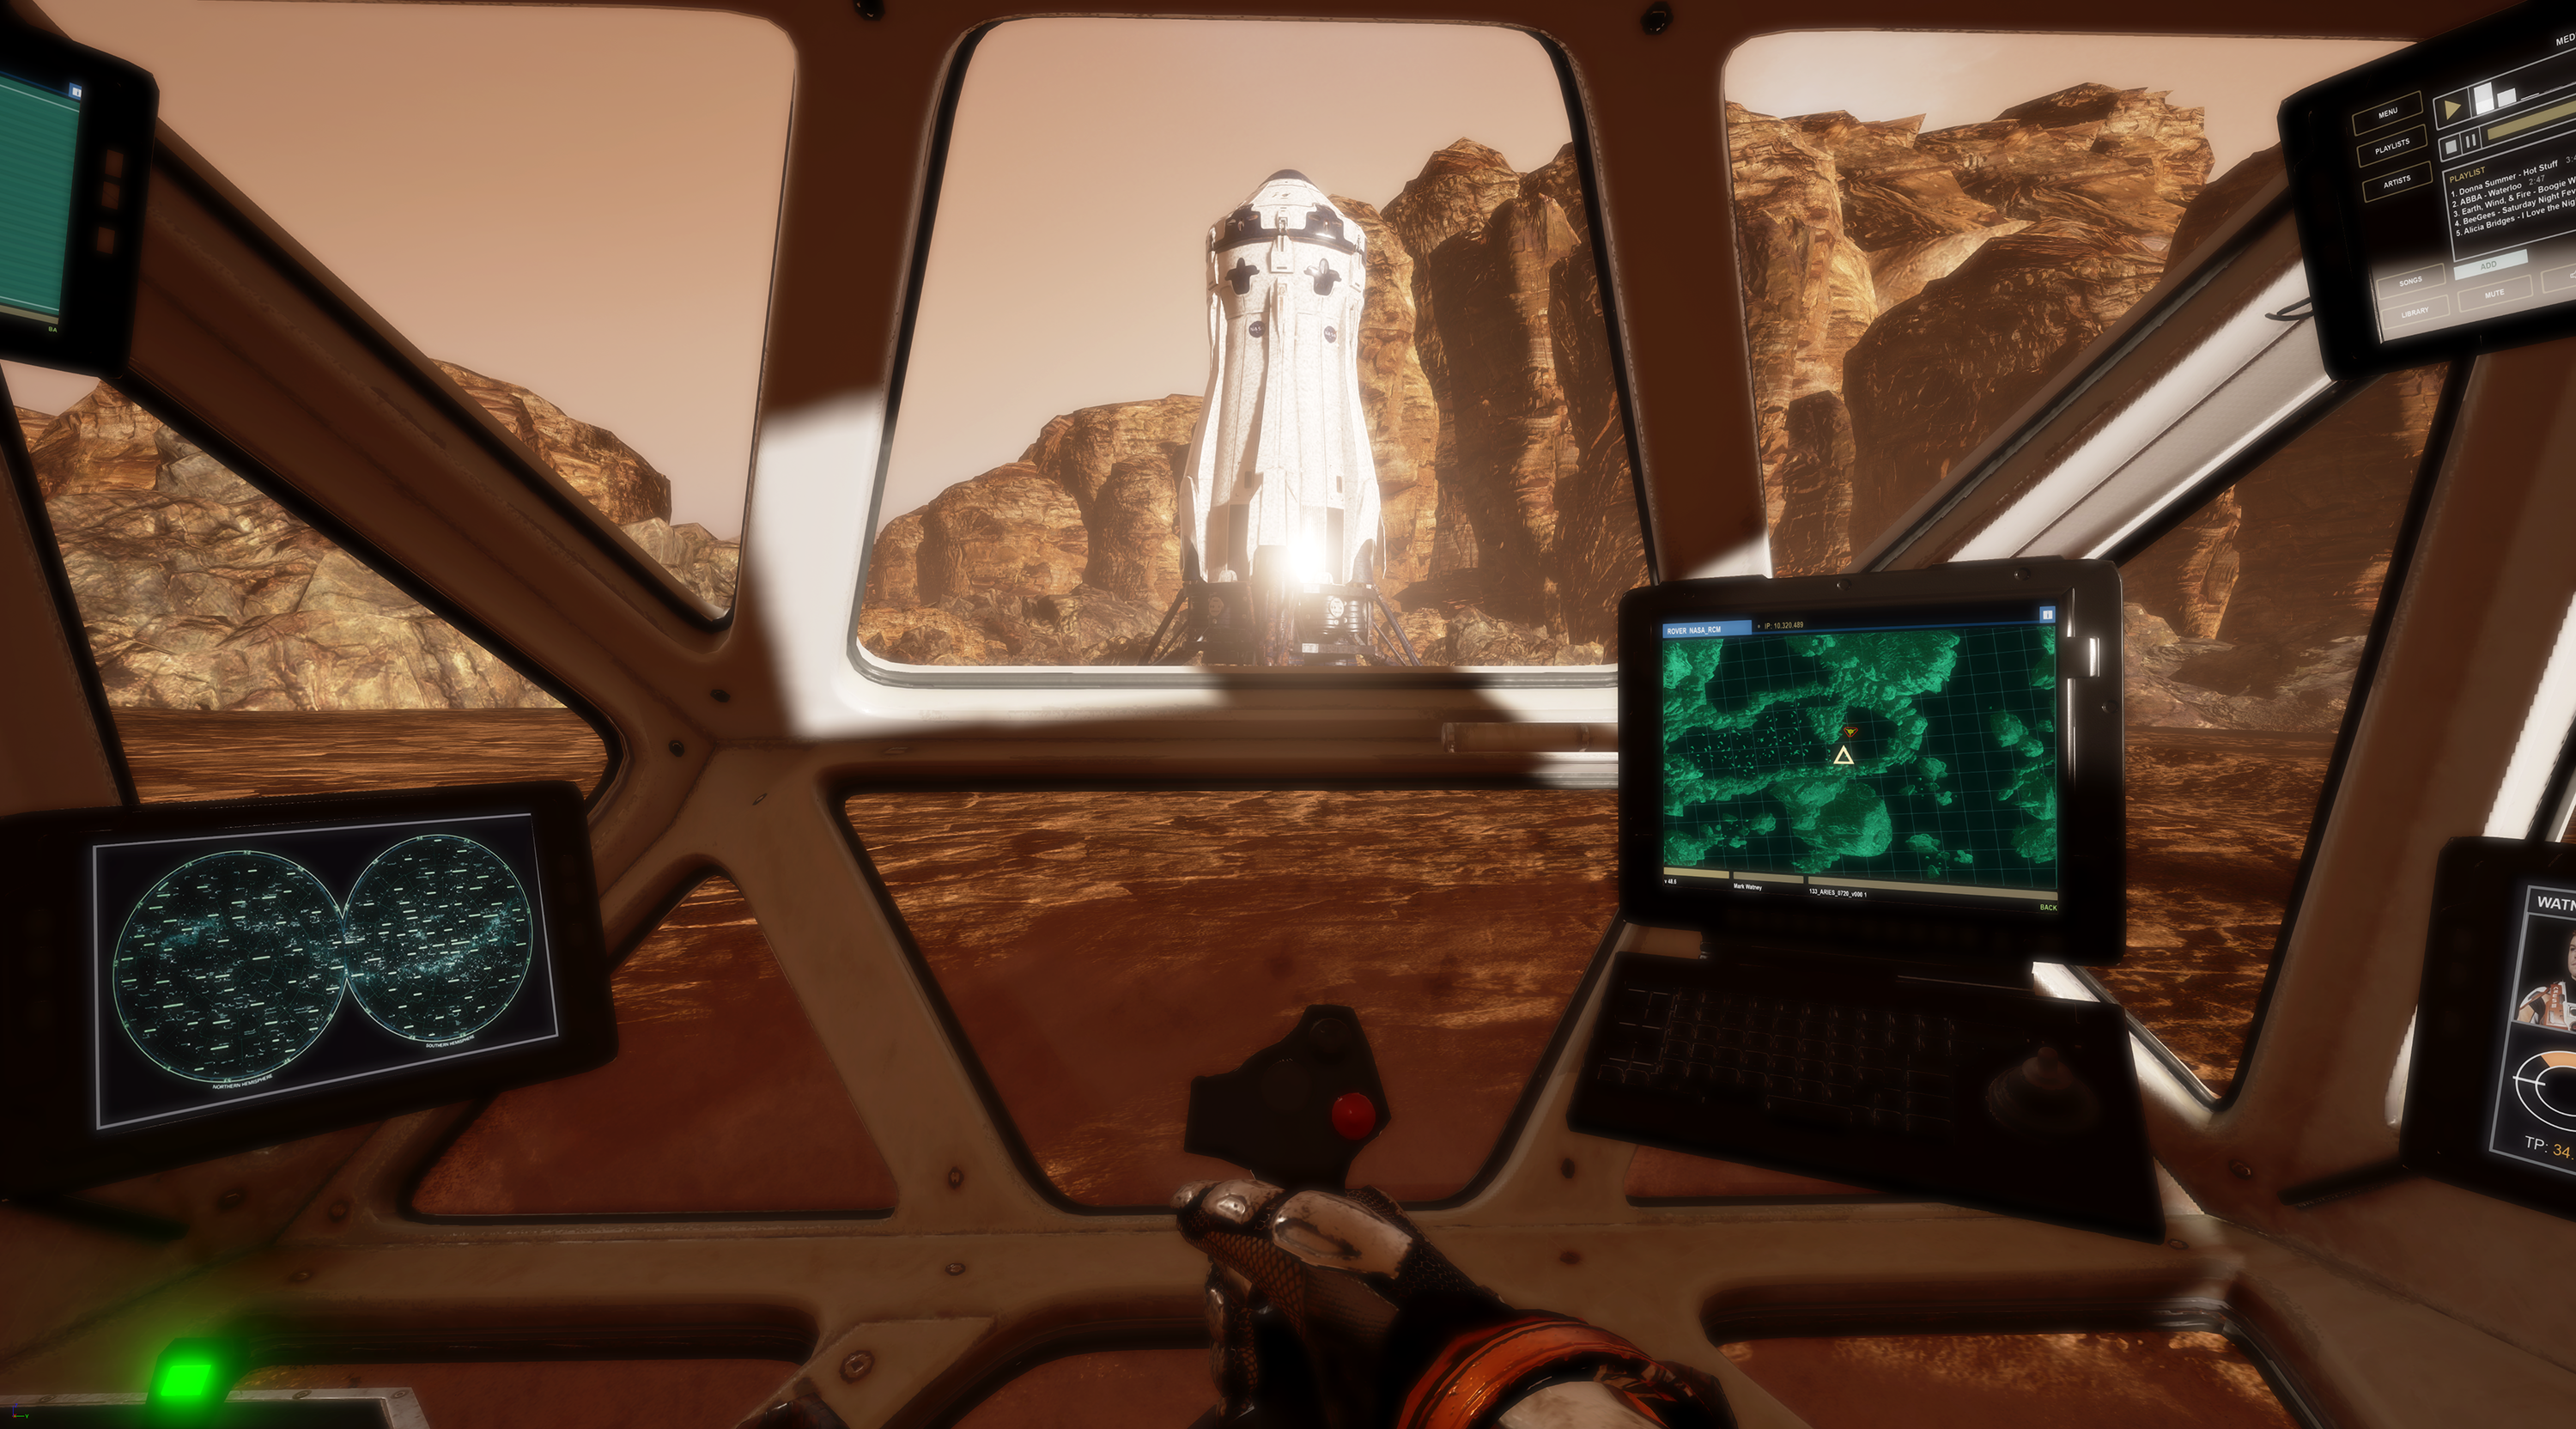 httpswww.popsci.comsitespopsci.comfilesdrive_the_rover_vr_image_3._photo_caption-_in_the_martian_vr_experience_participants_will_be_able_to_steer_the_mars_rover_over_the_rocky_terrain_of_mars.jpg